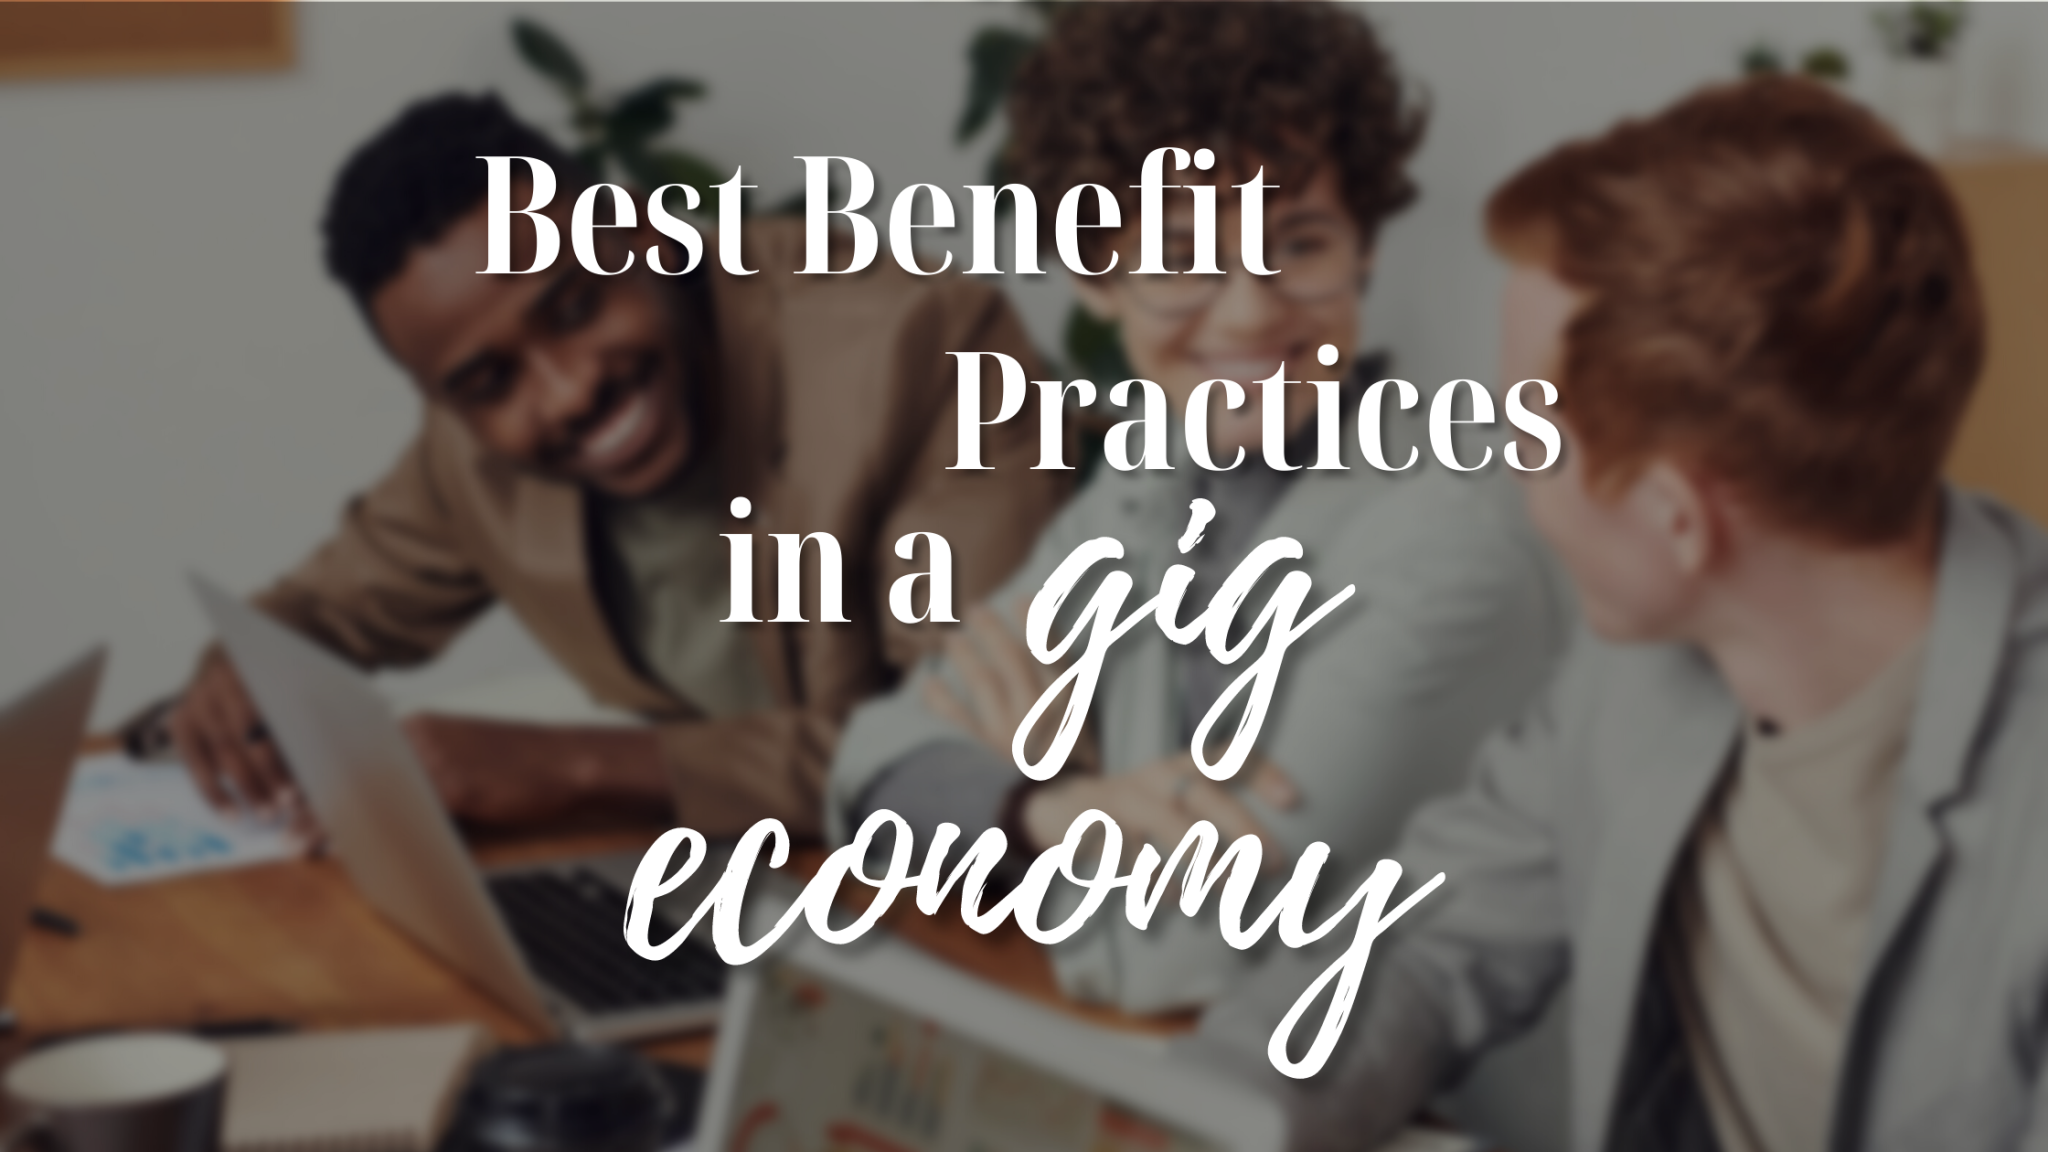 Best Benefits Practices for the Gig Economy